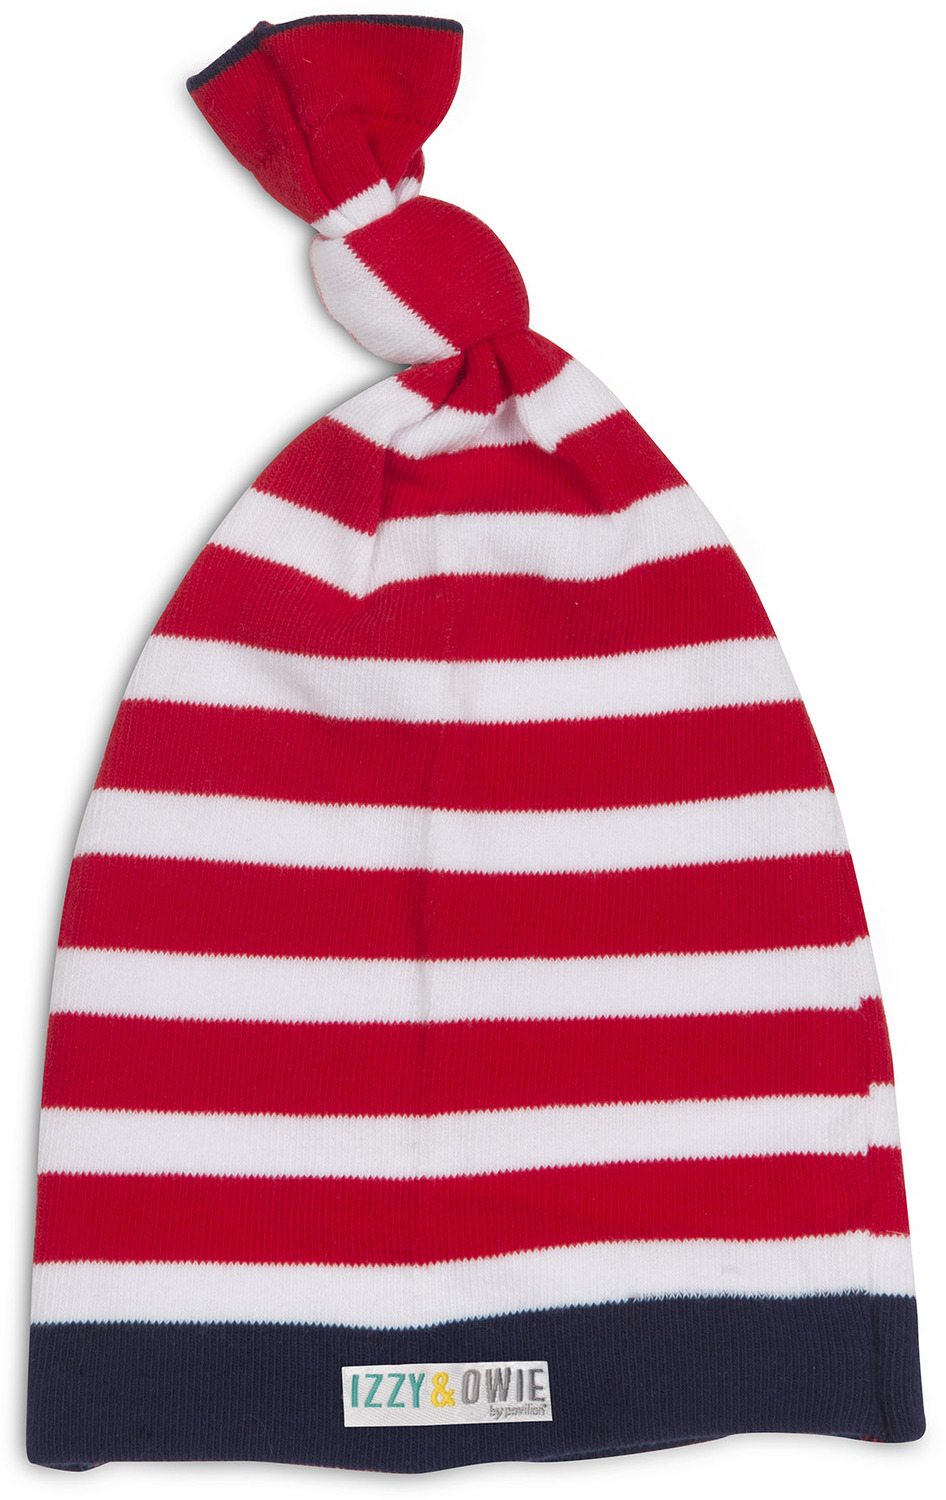 Red and Navy Stripe, One Size Fits All Baby Hat - Izzy & Owie - Pavilion